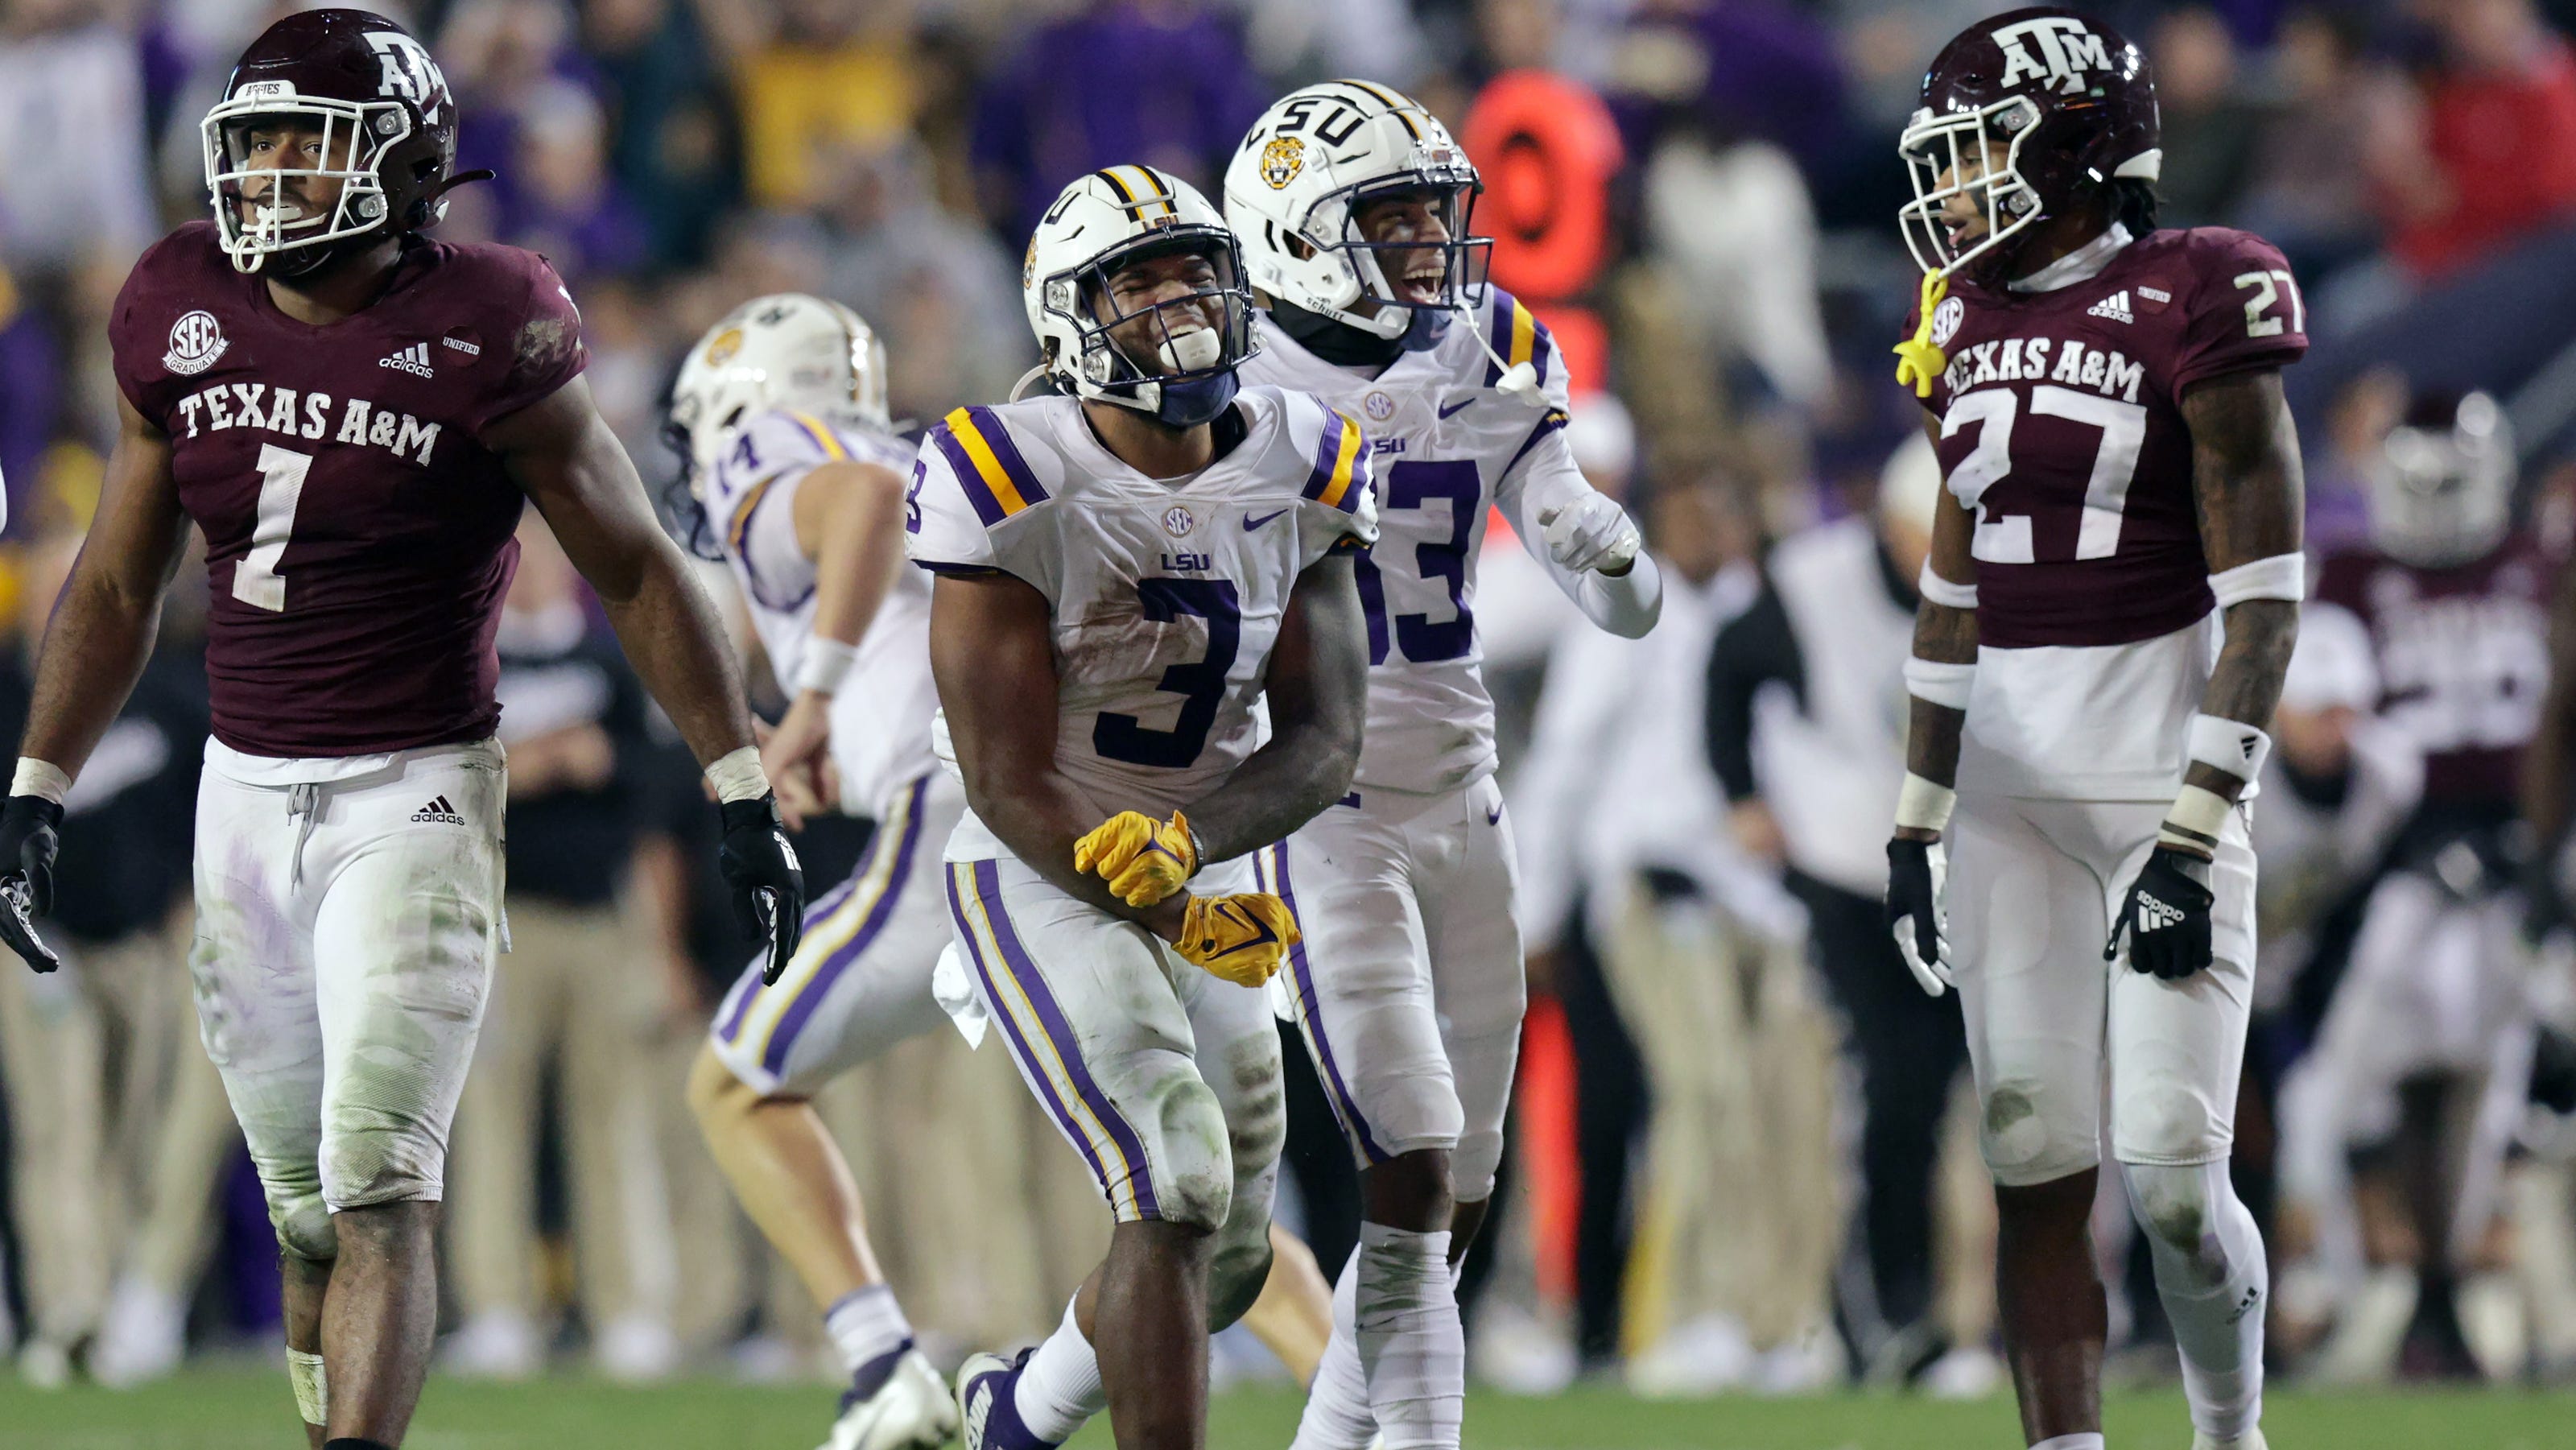   
																LSU football bowl predictions: Could the Tigers play the Ragin' Cajuns in Birmingham? 
															 